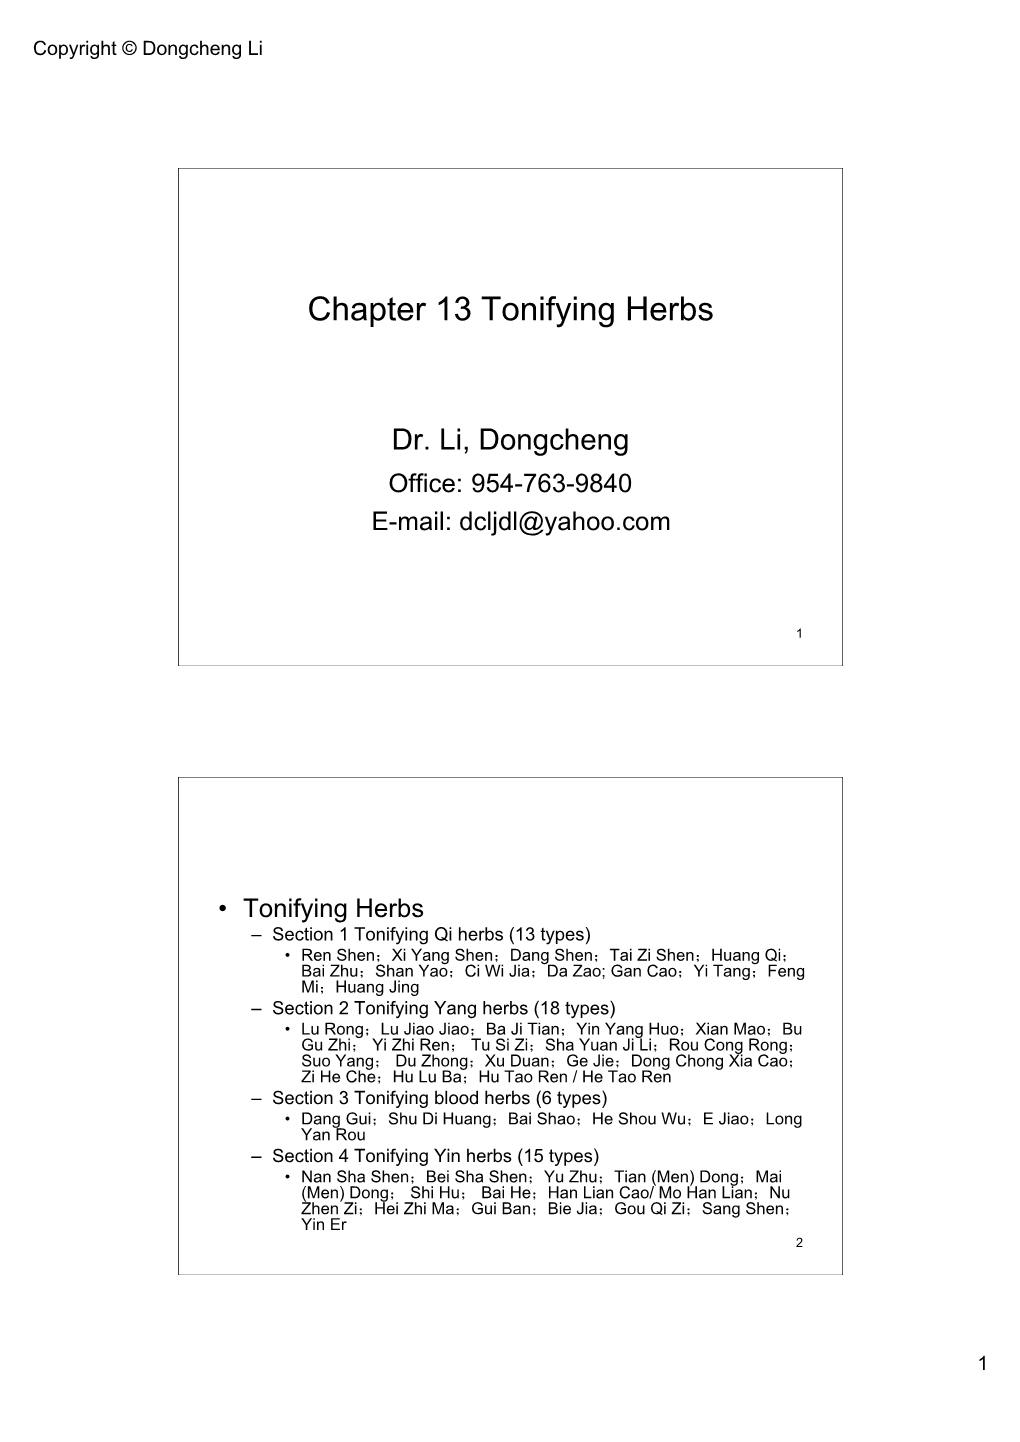 Chapter 13 Tonifying Herbs